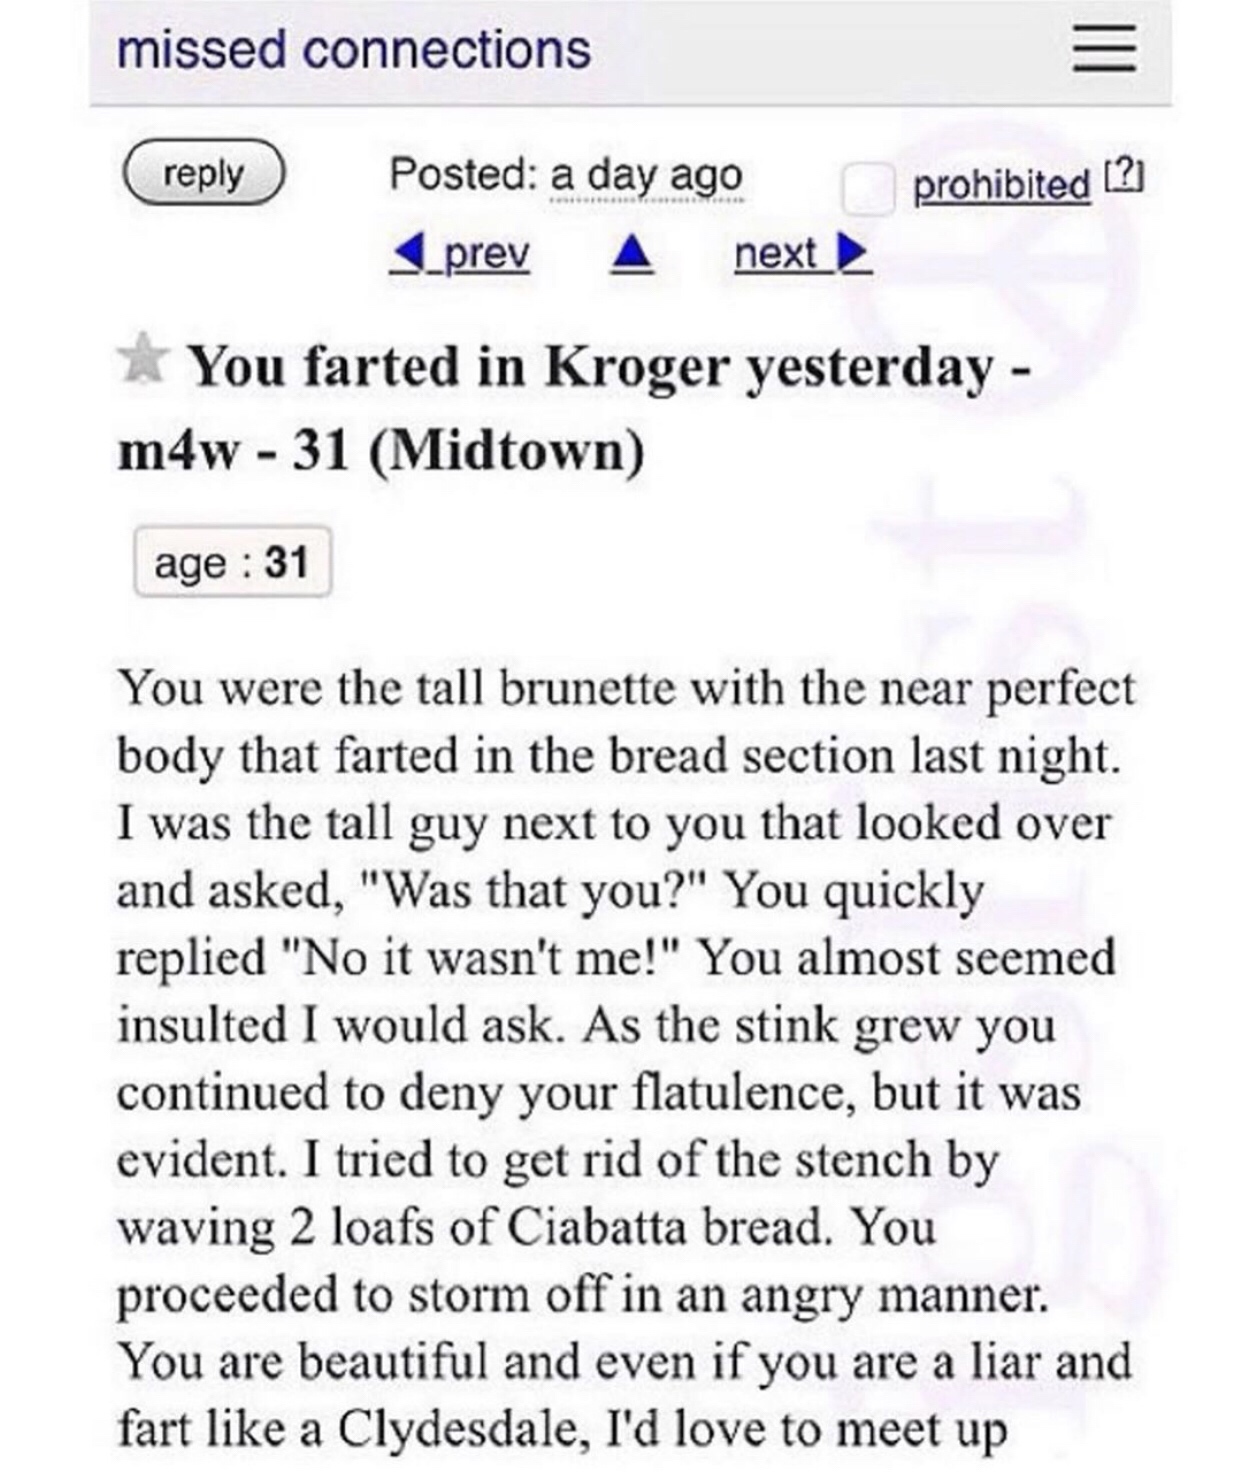 you farted in kroger yesterday - missed connections Posted a day ago prohibited 2 1_prev next You farted in Kroger yesterday m4w 31 Midtown age 31 You were the tall brunette with the near perfect body that farted in the bread section last night. I was the